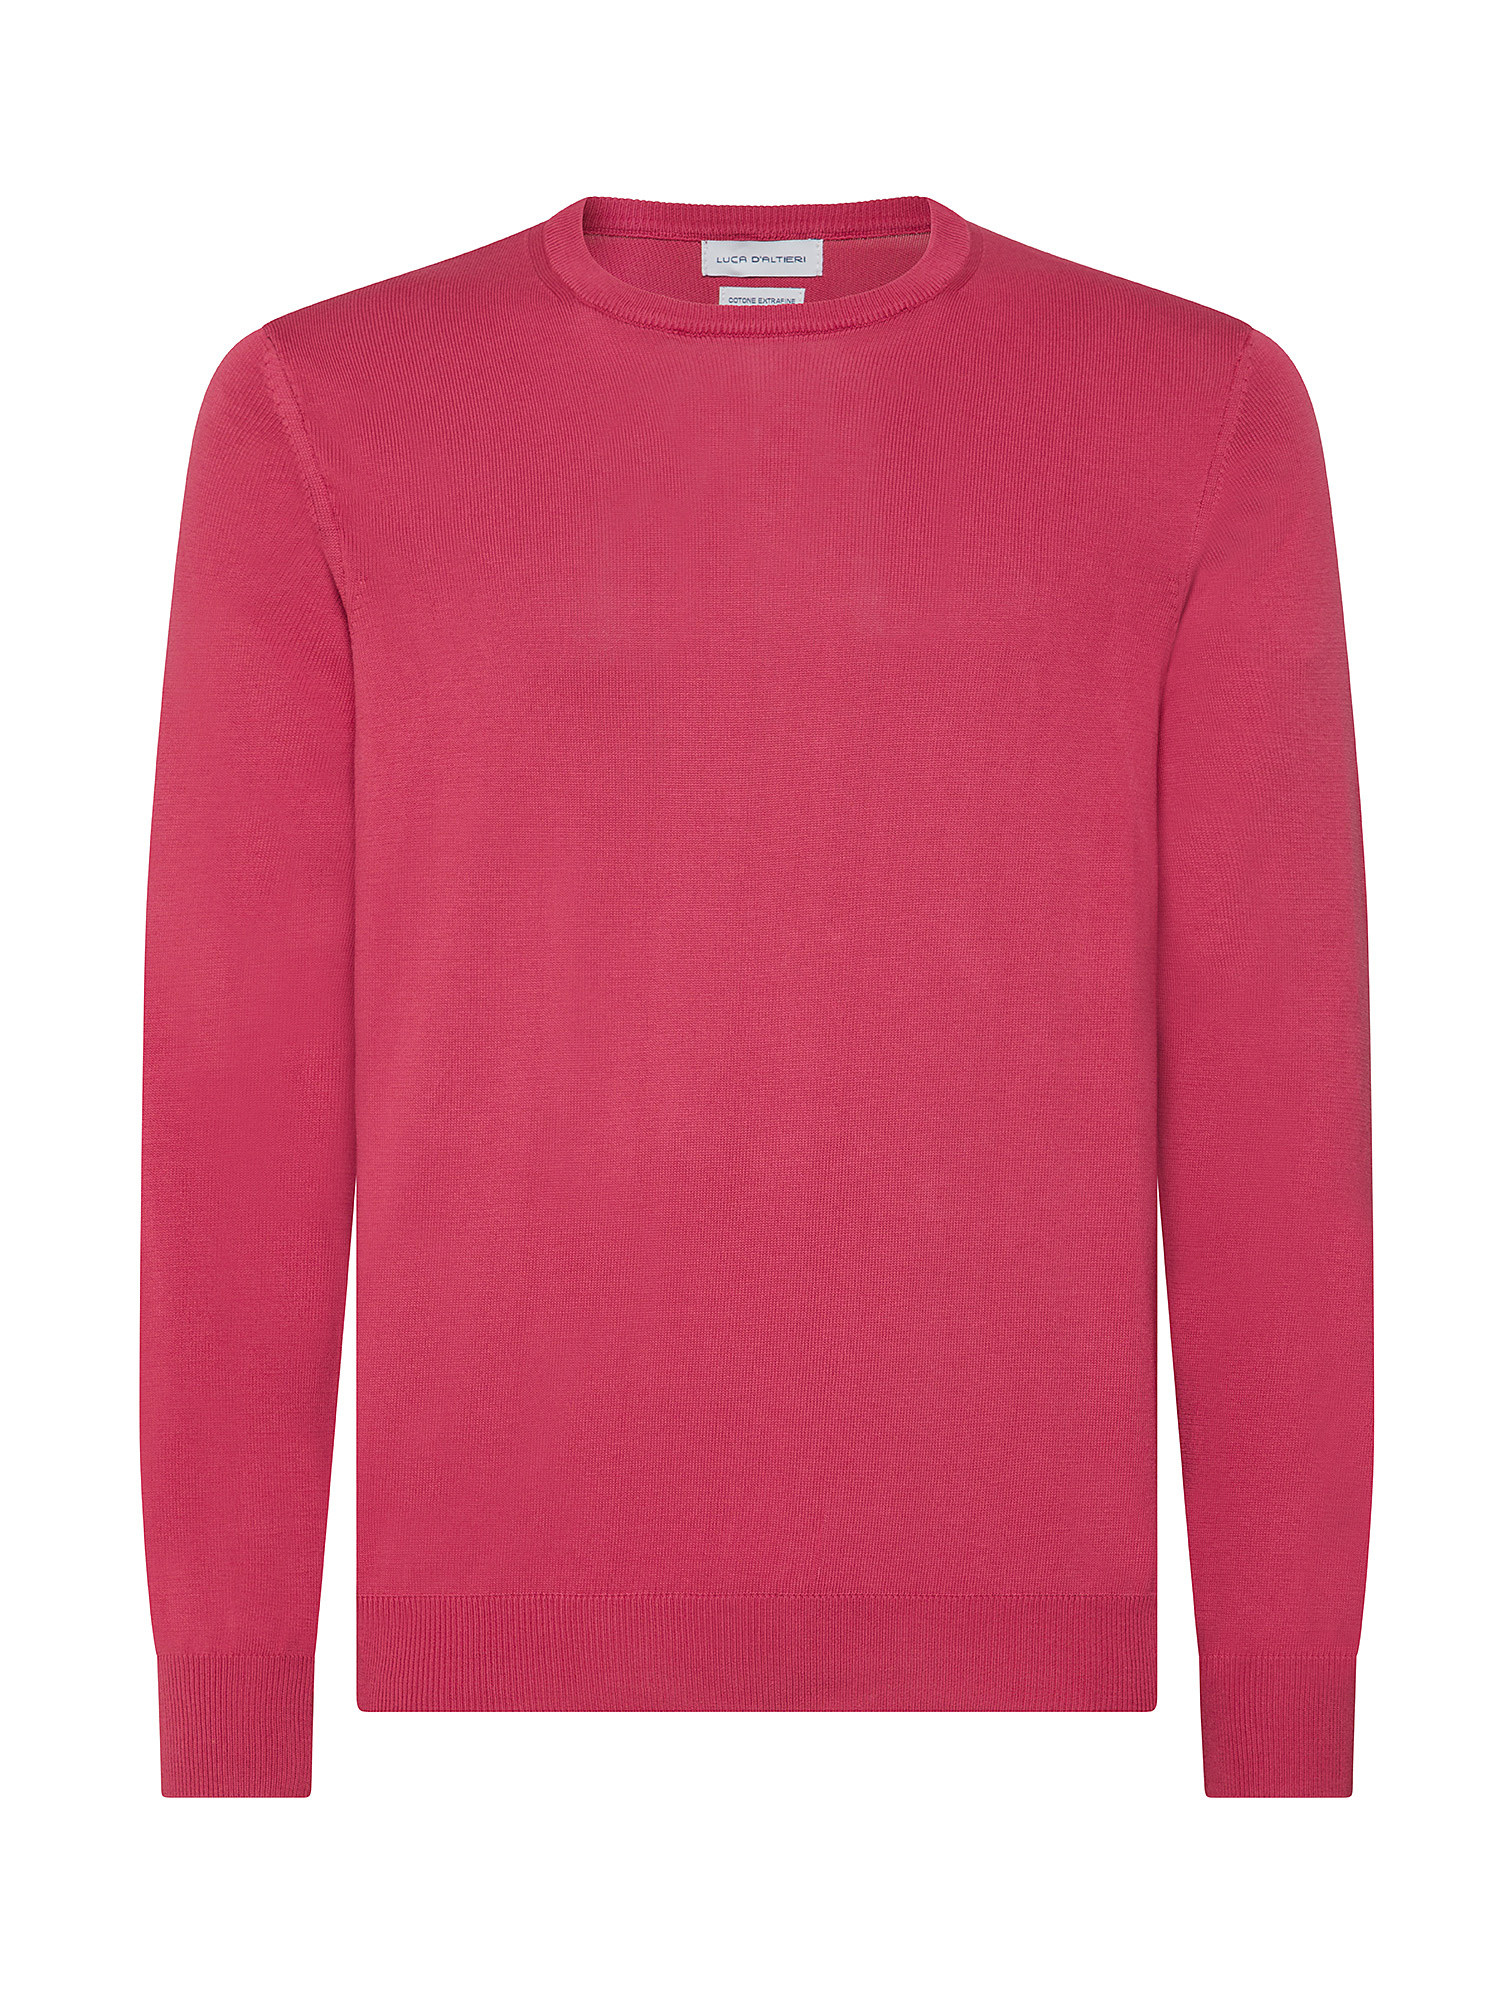 Luca D'Altieri - Crew neck sweater in extrafine pure cotton, Pink Fuchsia, large image number 0